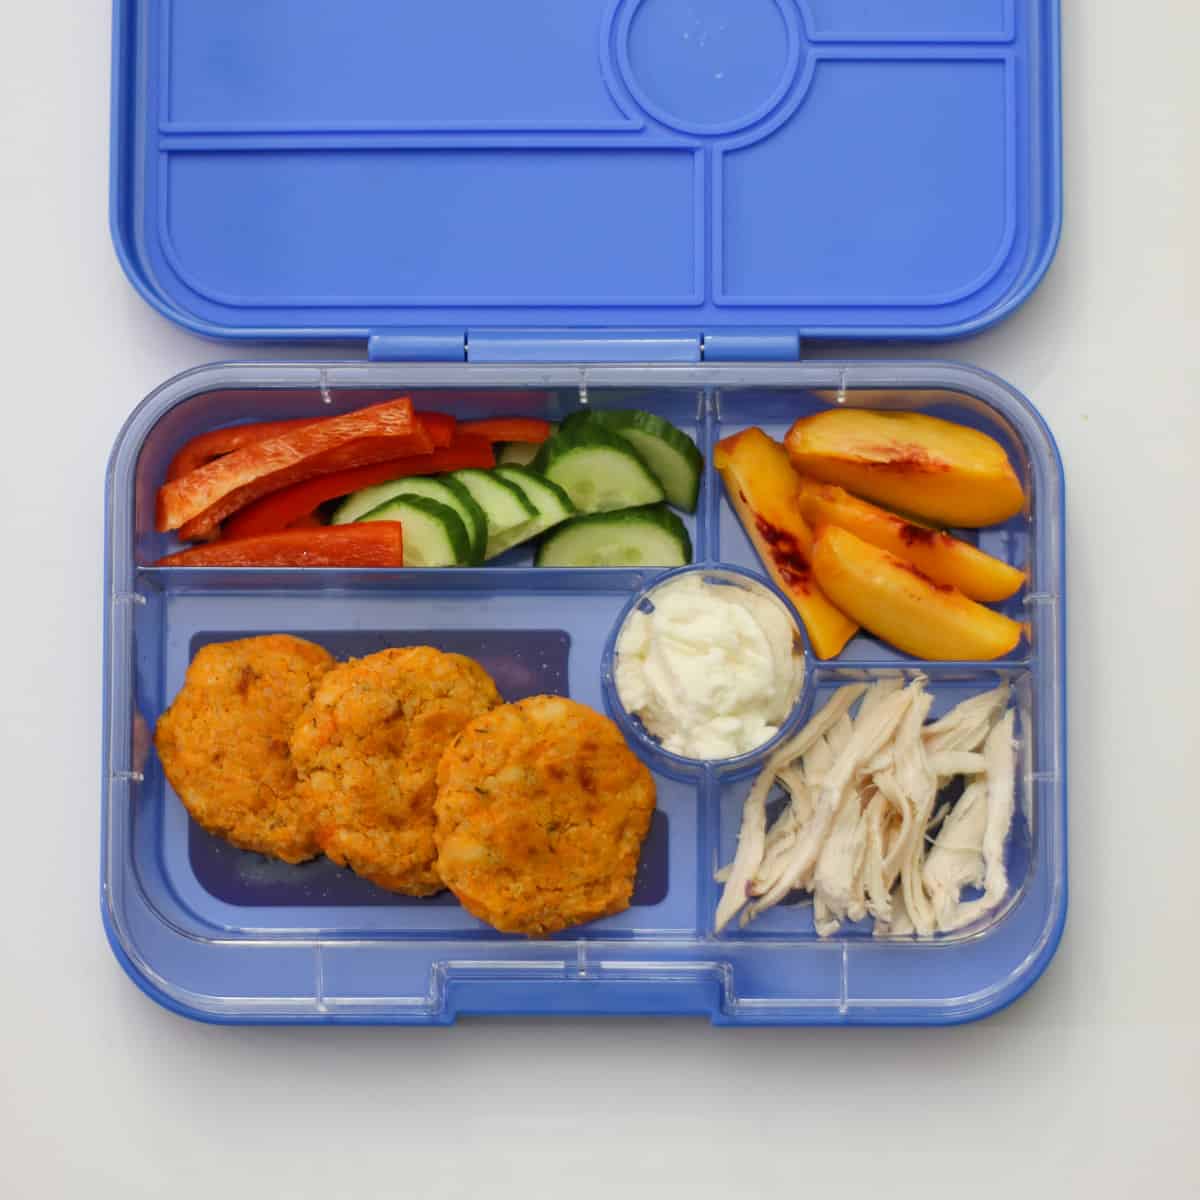 Patties in a school lunch box with ricotta, peaces, cucumber, and bell peppers.